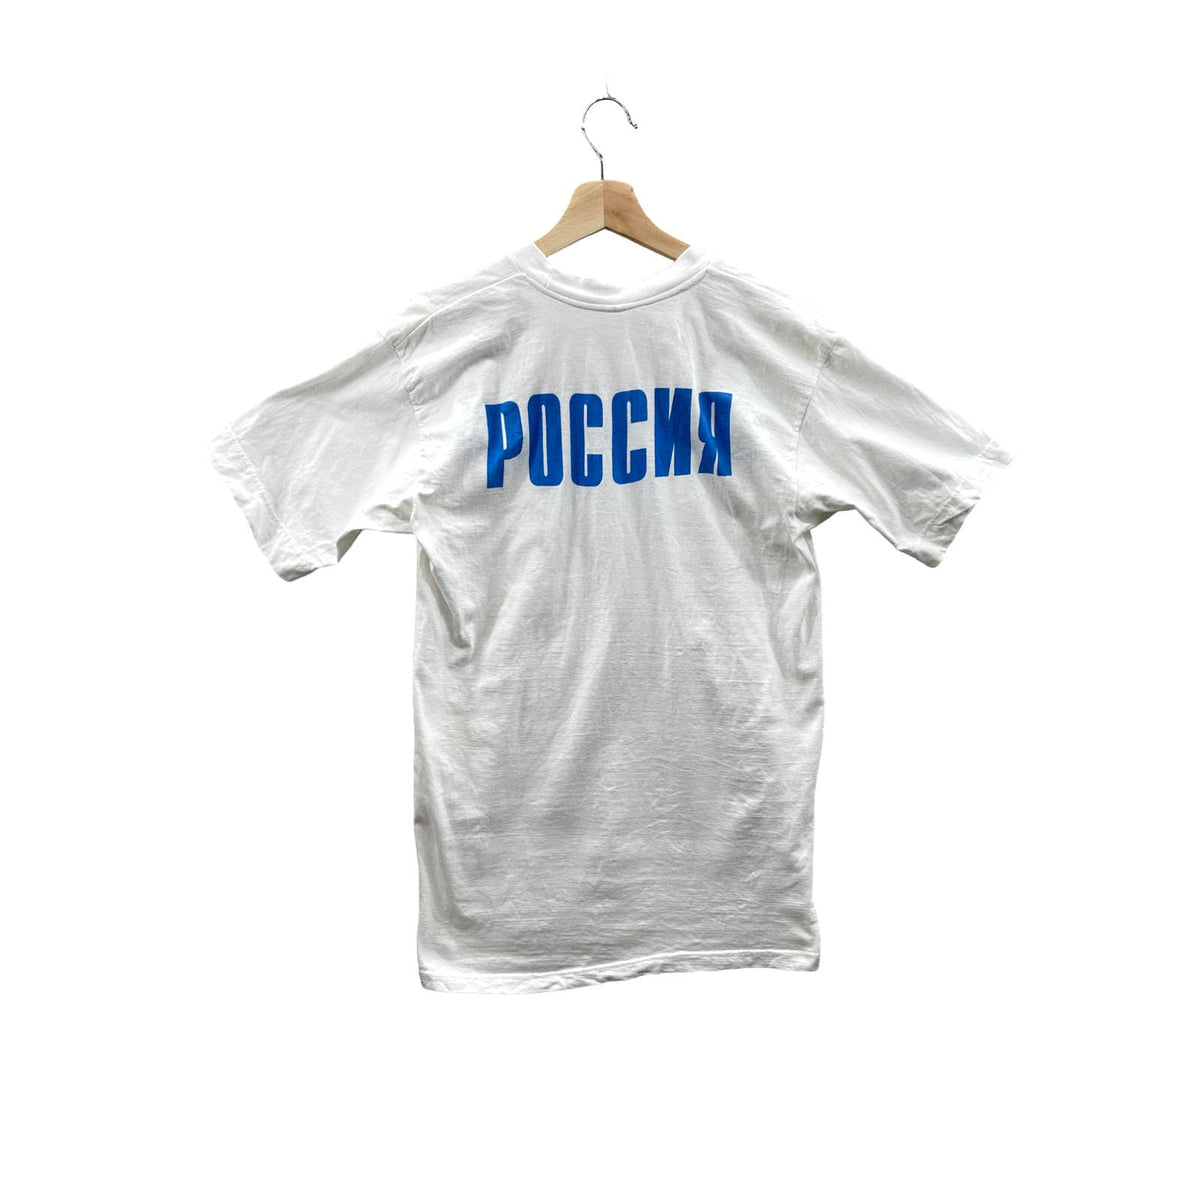 Vintage 1996 Russian Wrestling Graphic T-Shirt